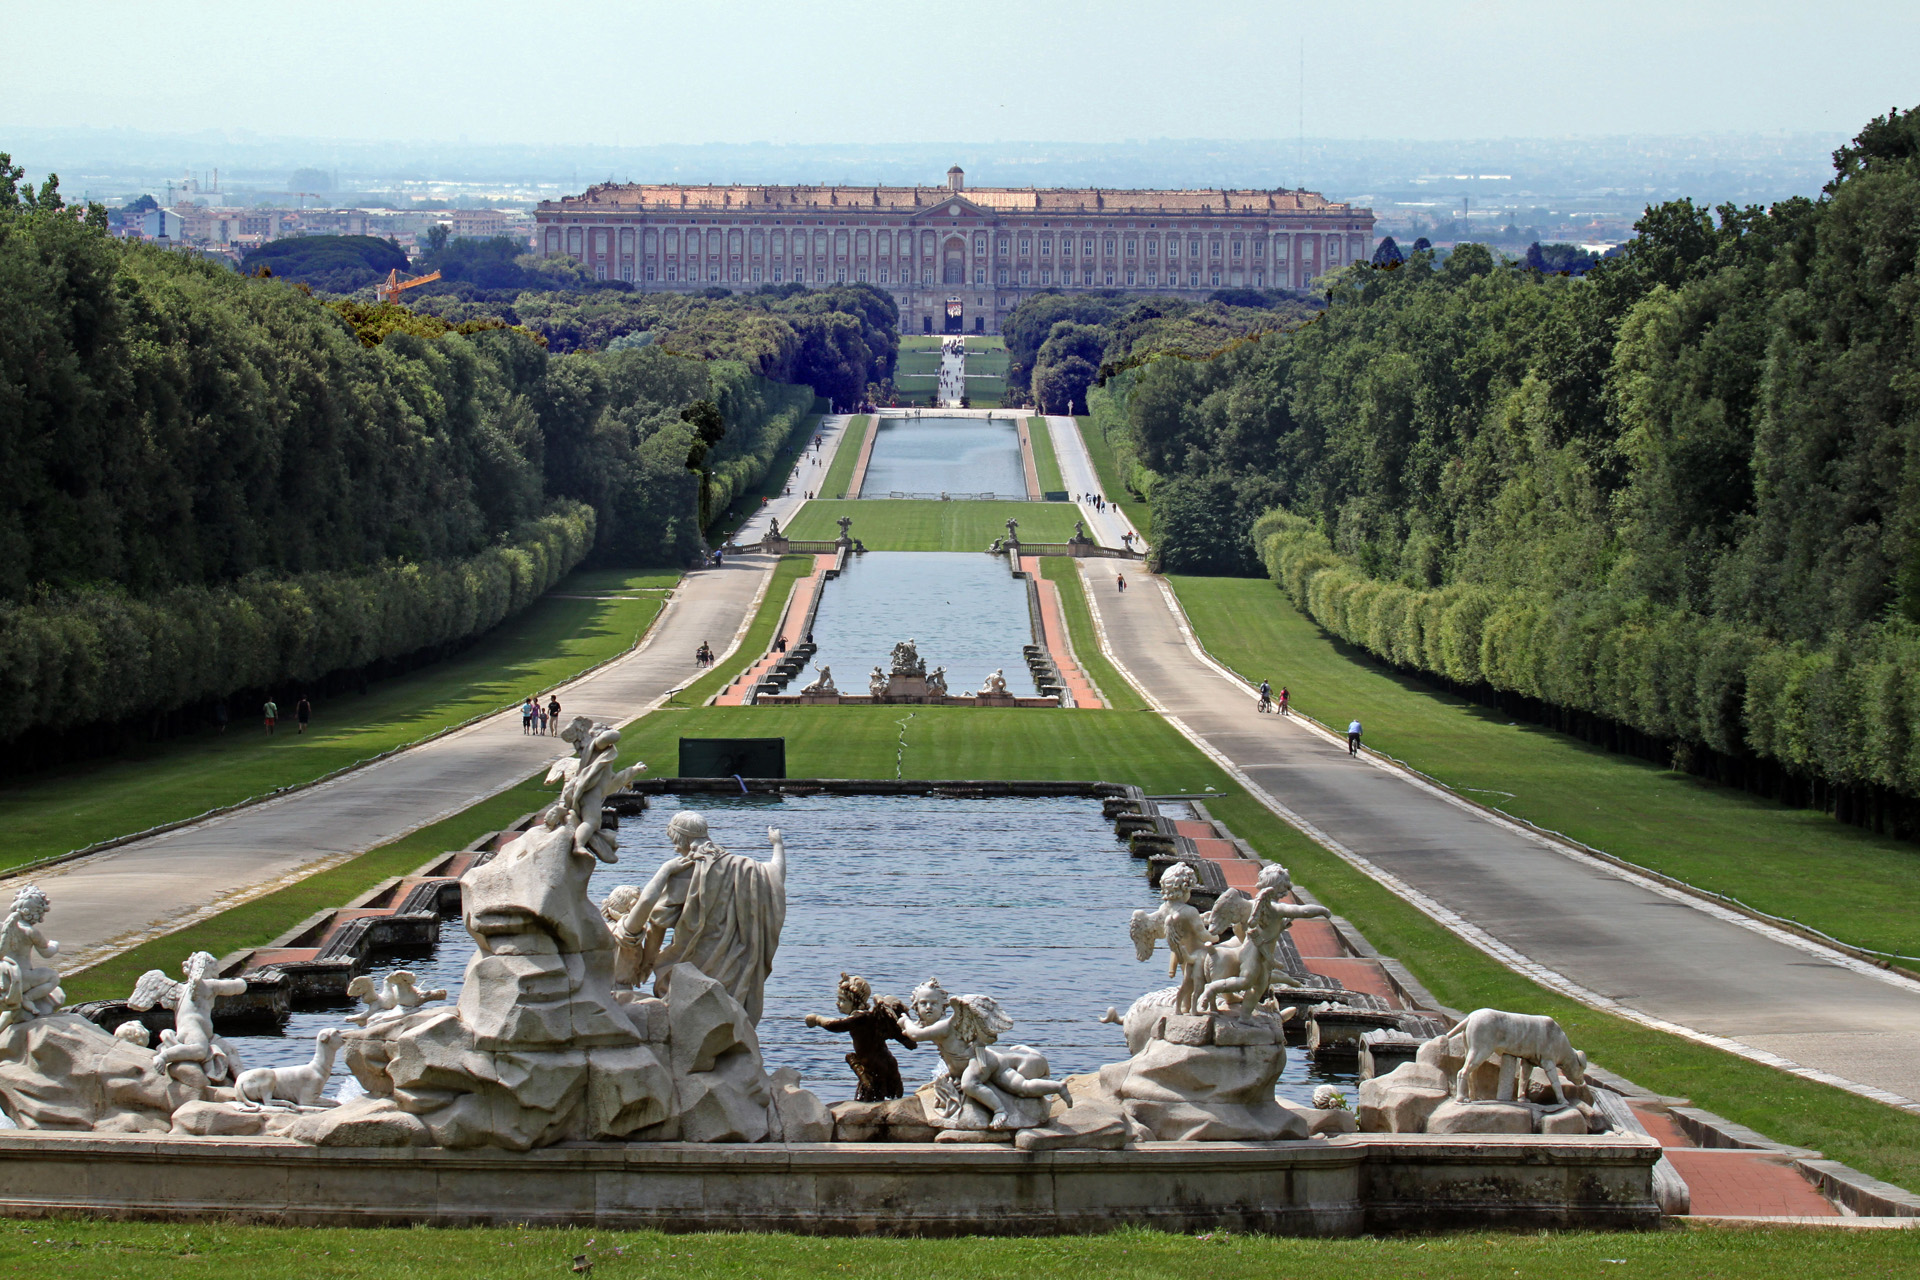 The Royal Palace of Caserta, Italy is used for filming the Winter Palace in The Great